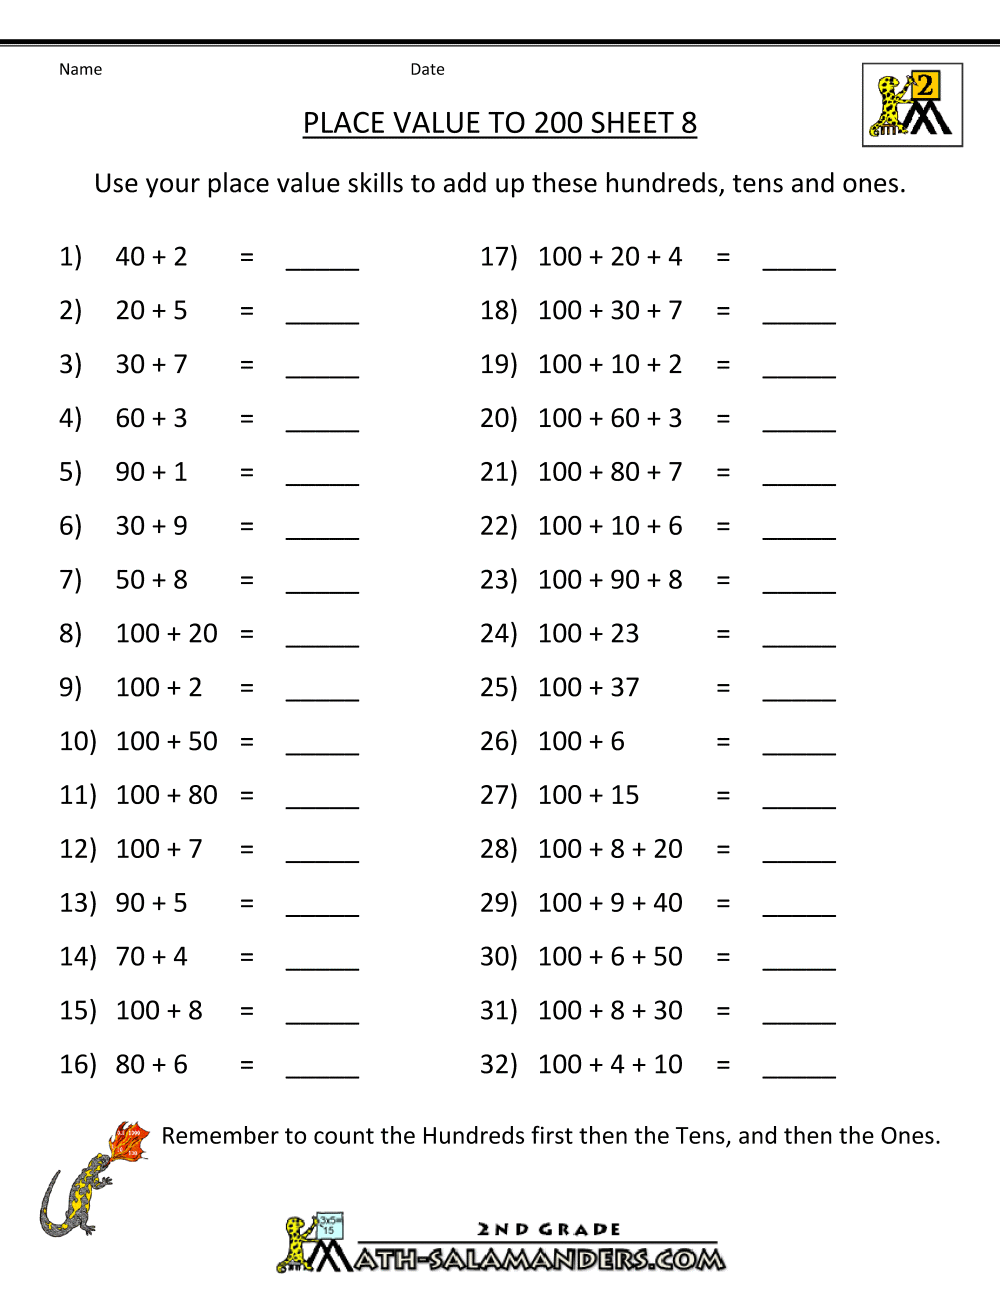 place-value-worksheet-for-rounding-tens-and-hundreds-to-the-nearest-tens-with-numbers